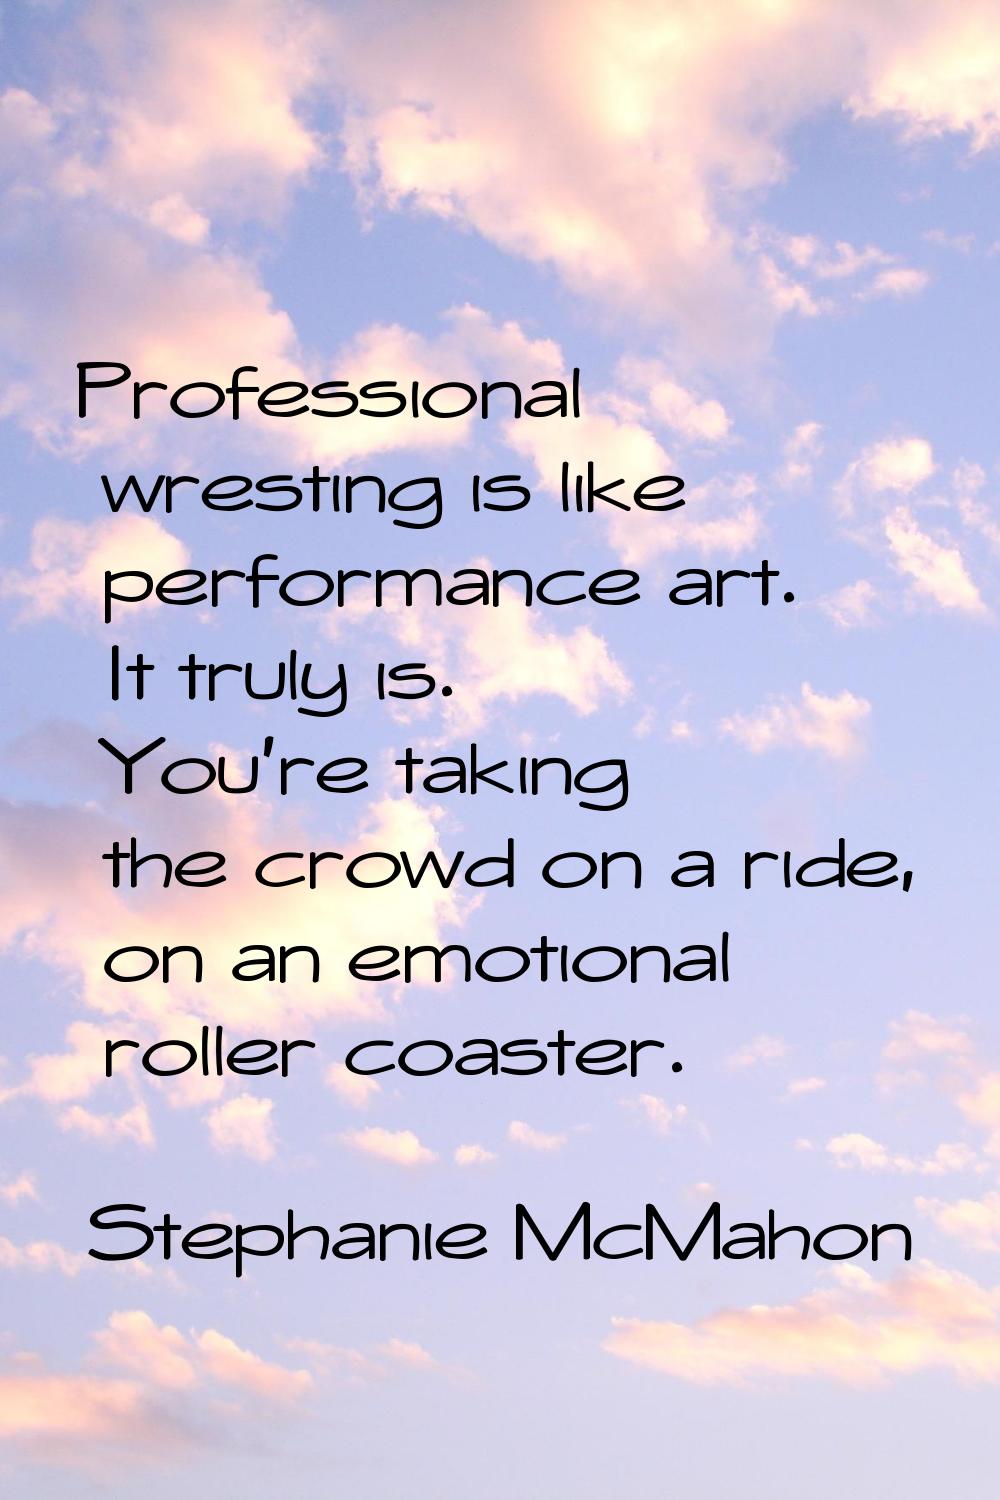 Professional wresting is like performance art. It truly is. You're taking the crowd on a ride, on a